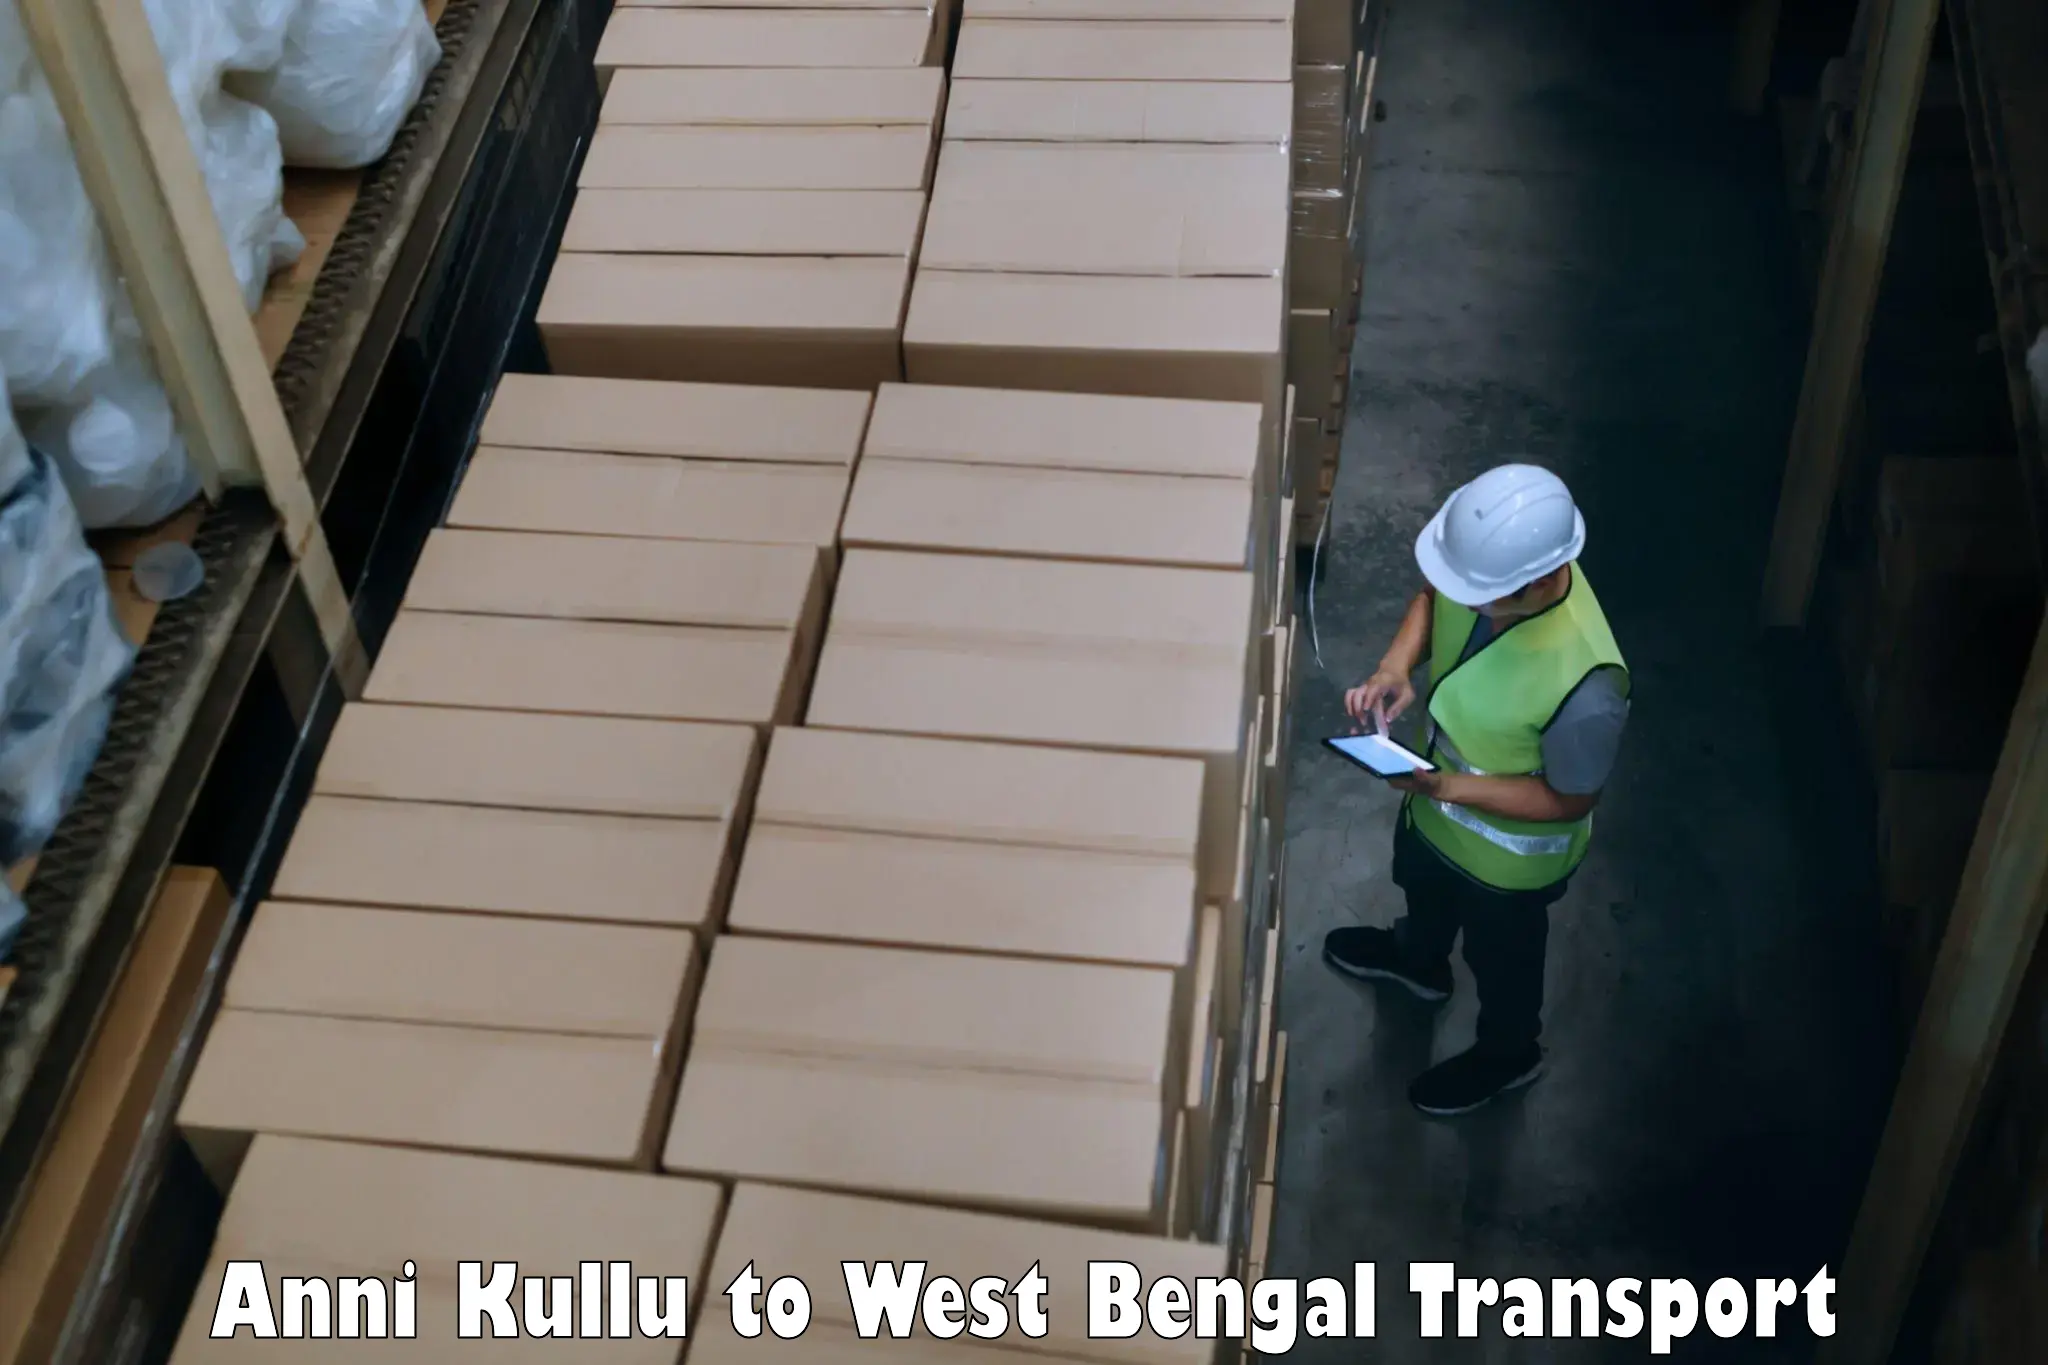 Commercial transport service Anni Kullu to Tollygunge